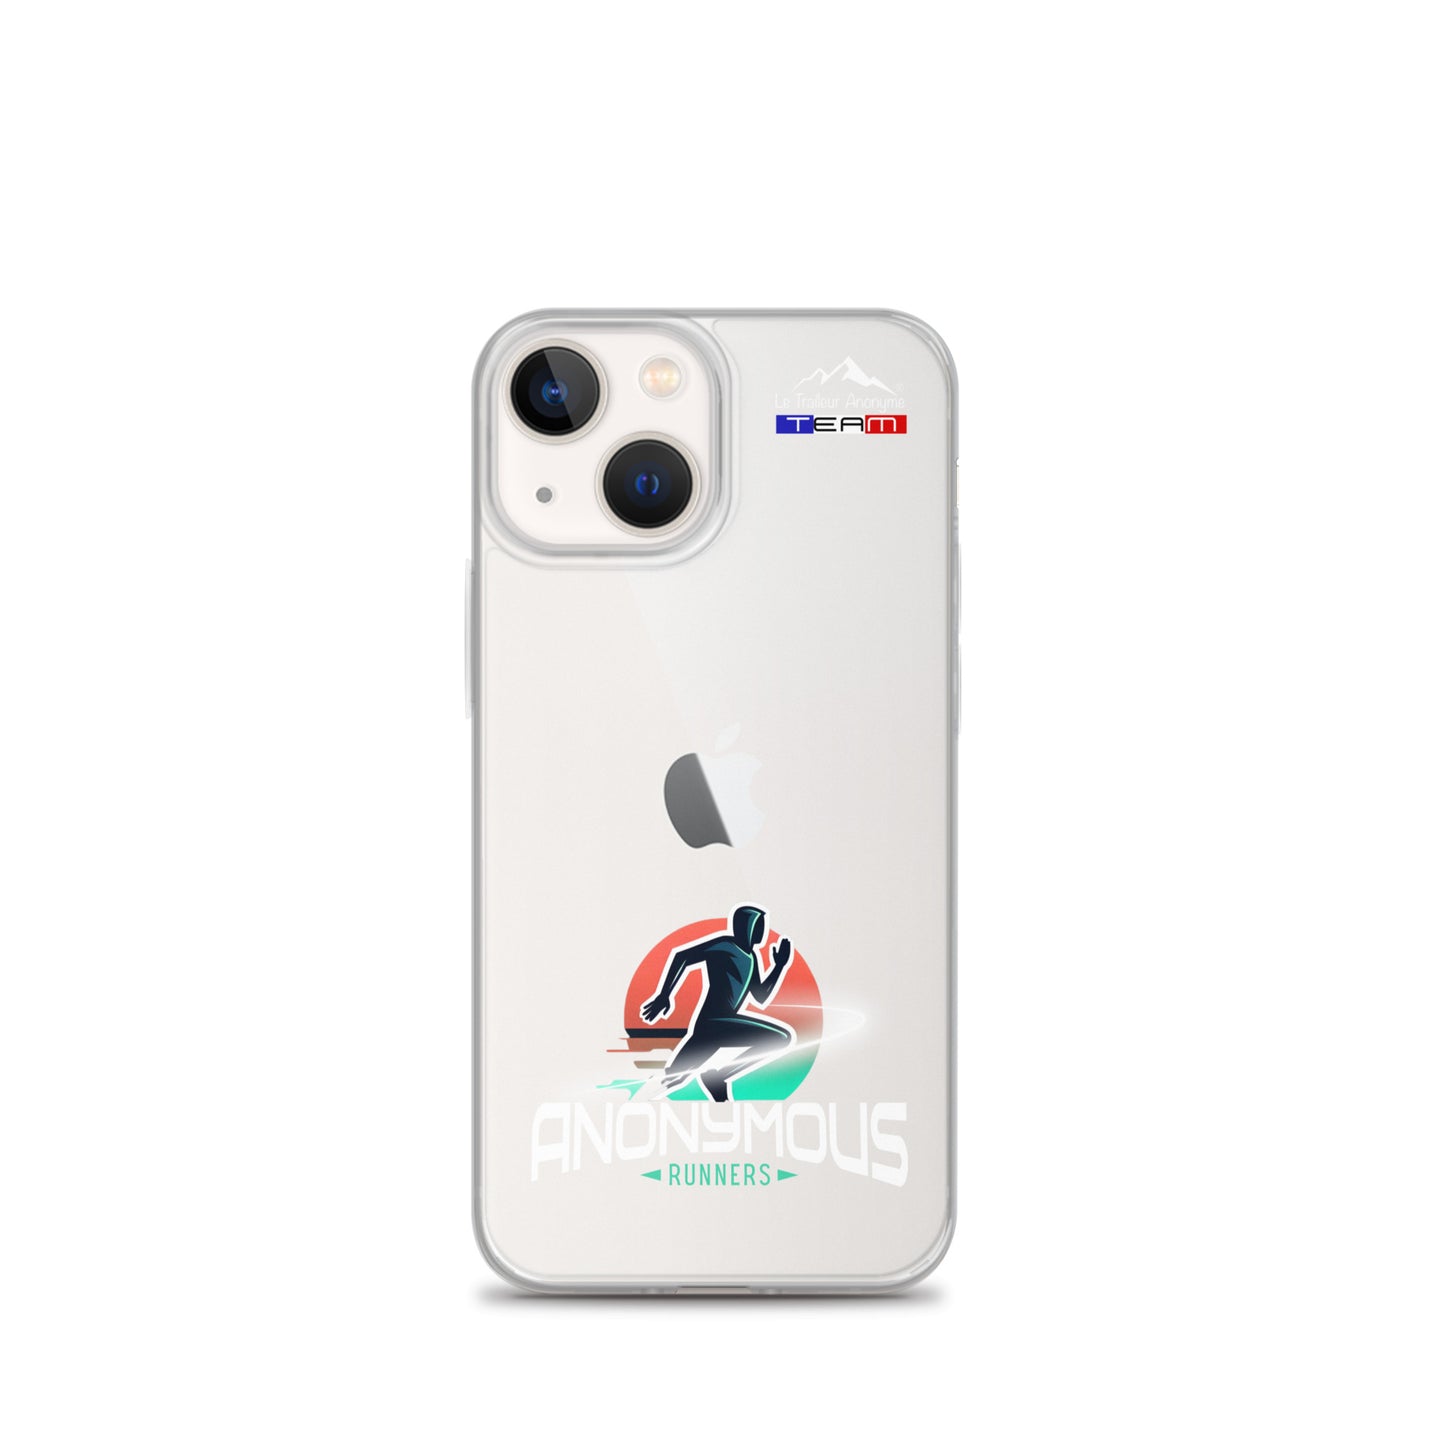 Coque Transparente pour iPhone® - Anonymous Runners